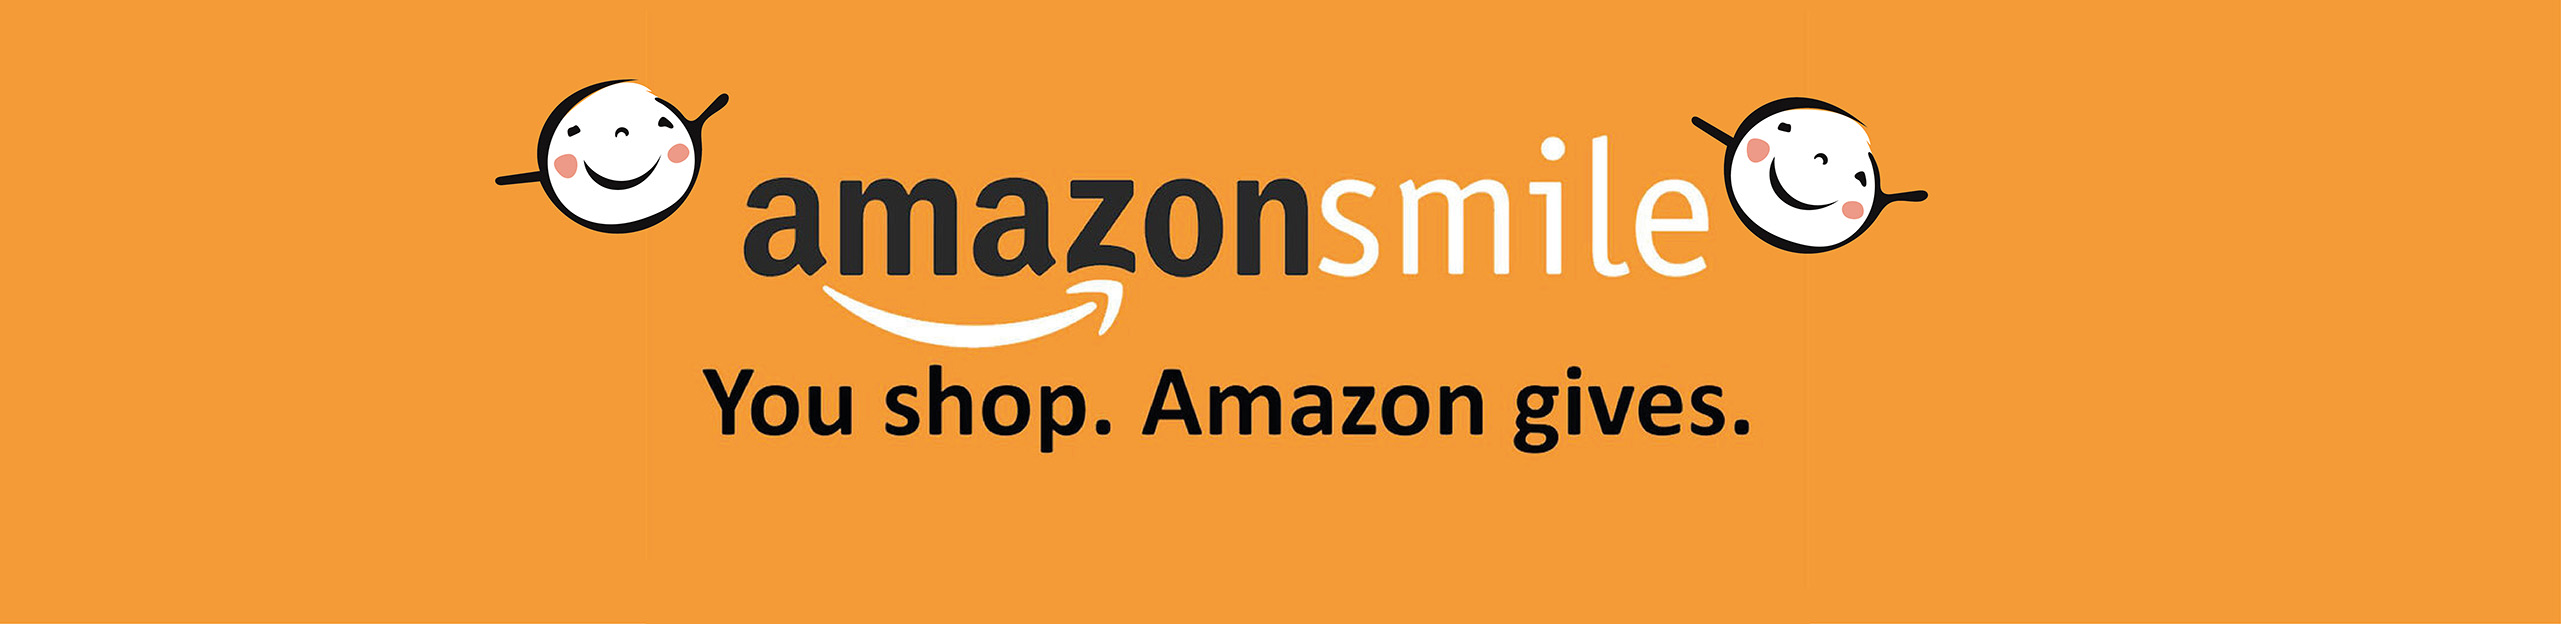 AmazonSmile – Derian House Childrens Hospice